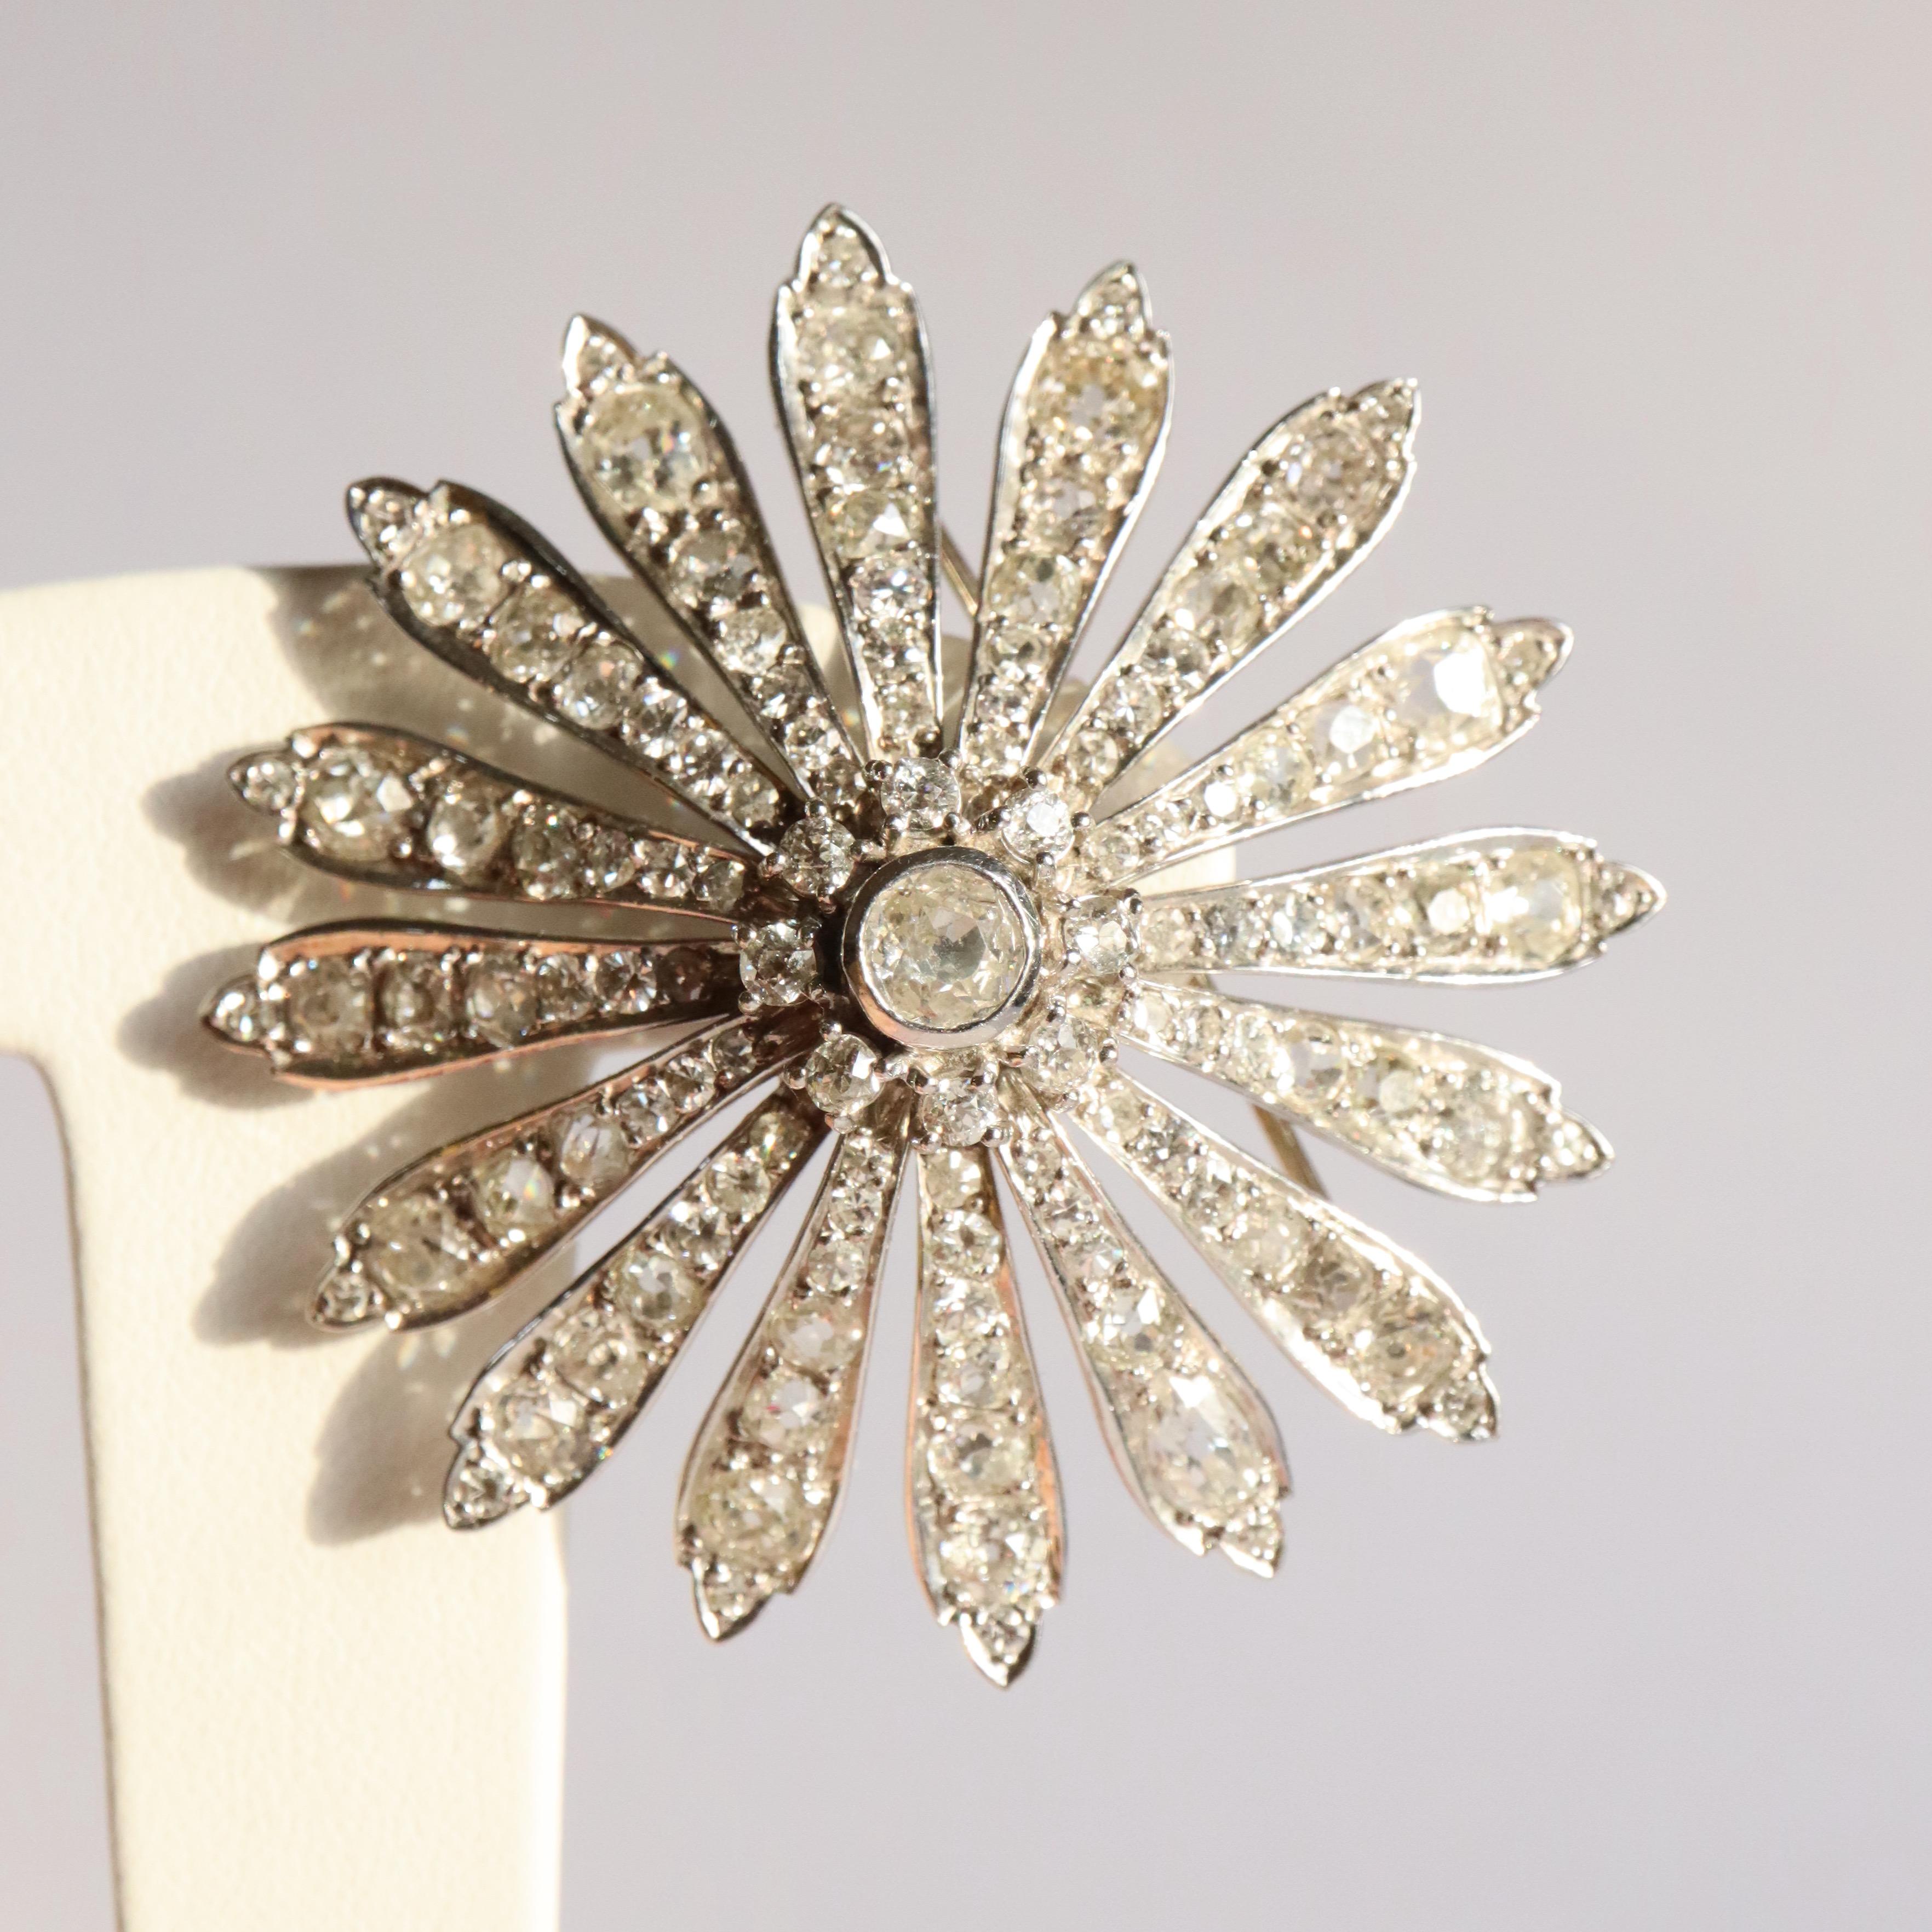 Art Deco Vintage Daisy Brooch circa 1900-1930 in 18 Carat White Gold and Diamonds For Sale